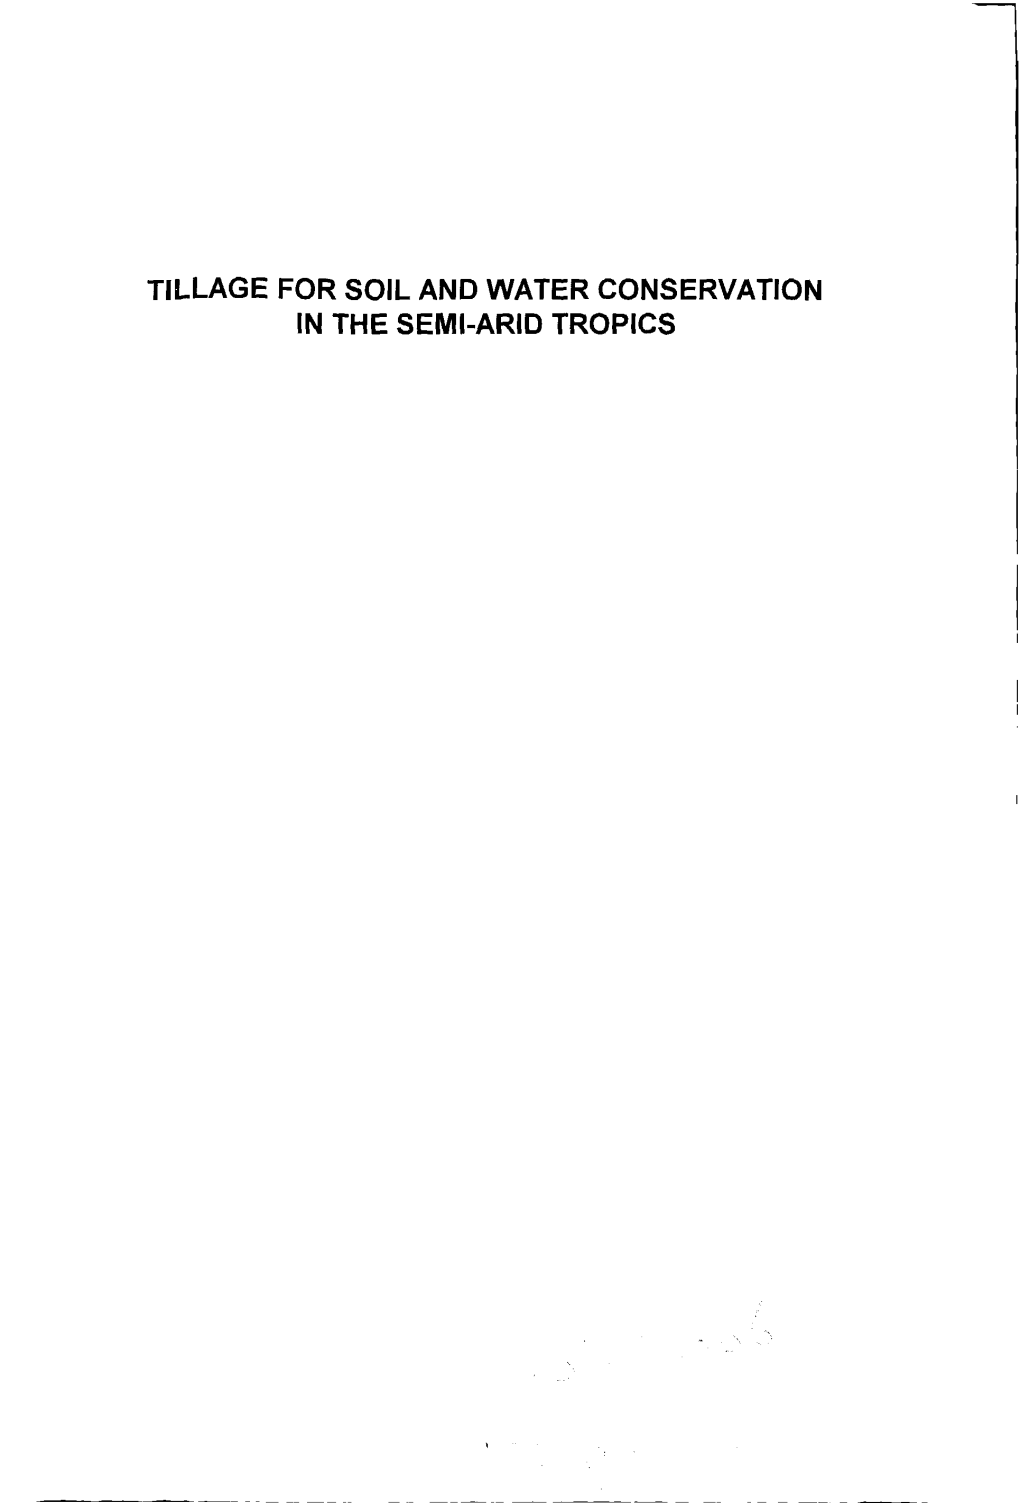 Tillage for Soil and Water Conservation in the Semi-Arid Tropics